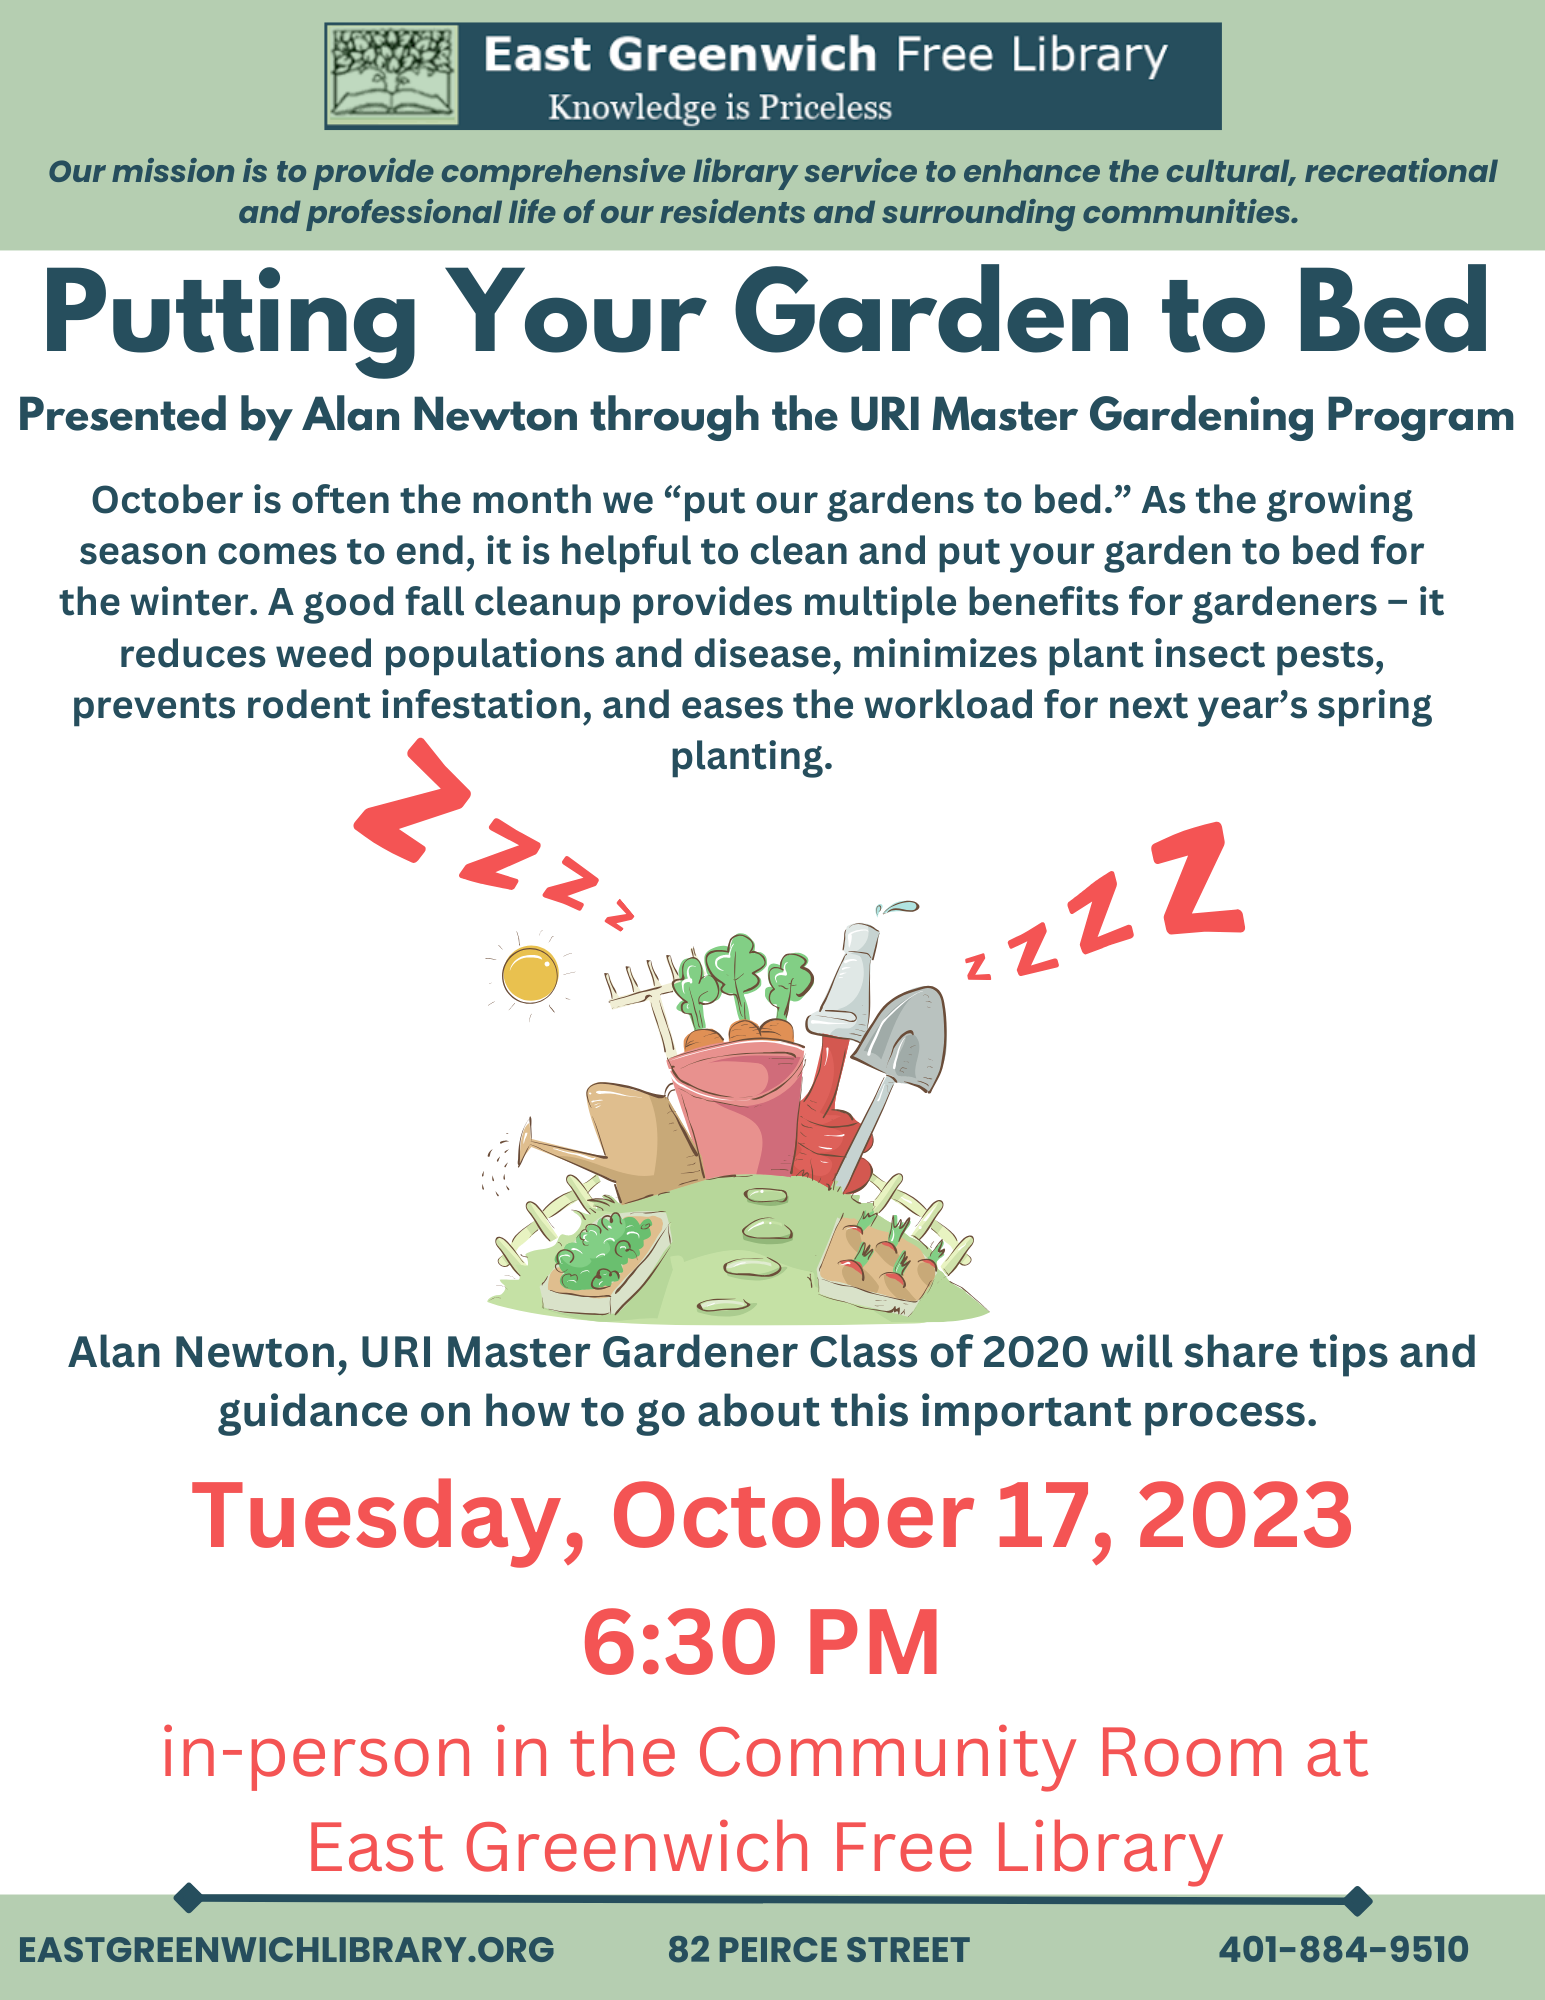 Putting Your Garden to Bed program flyer